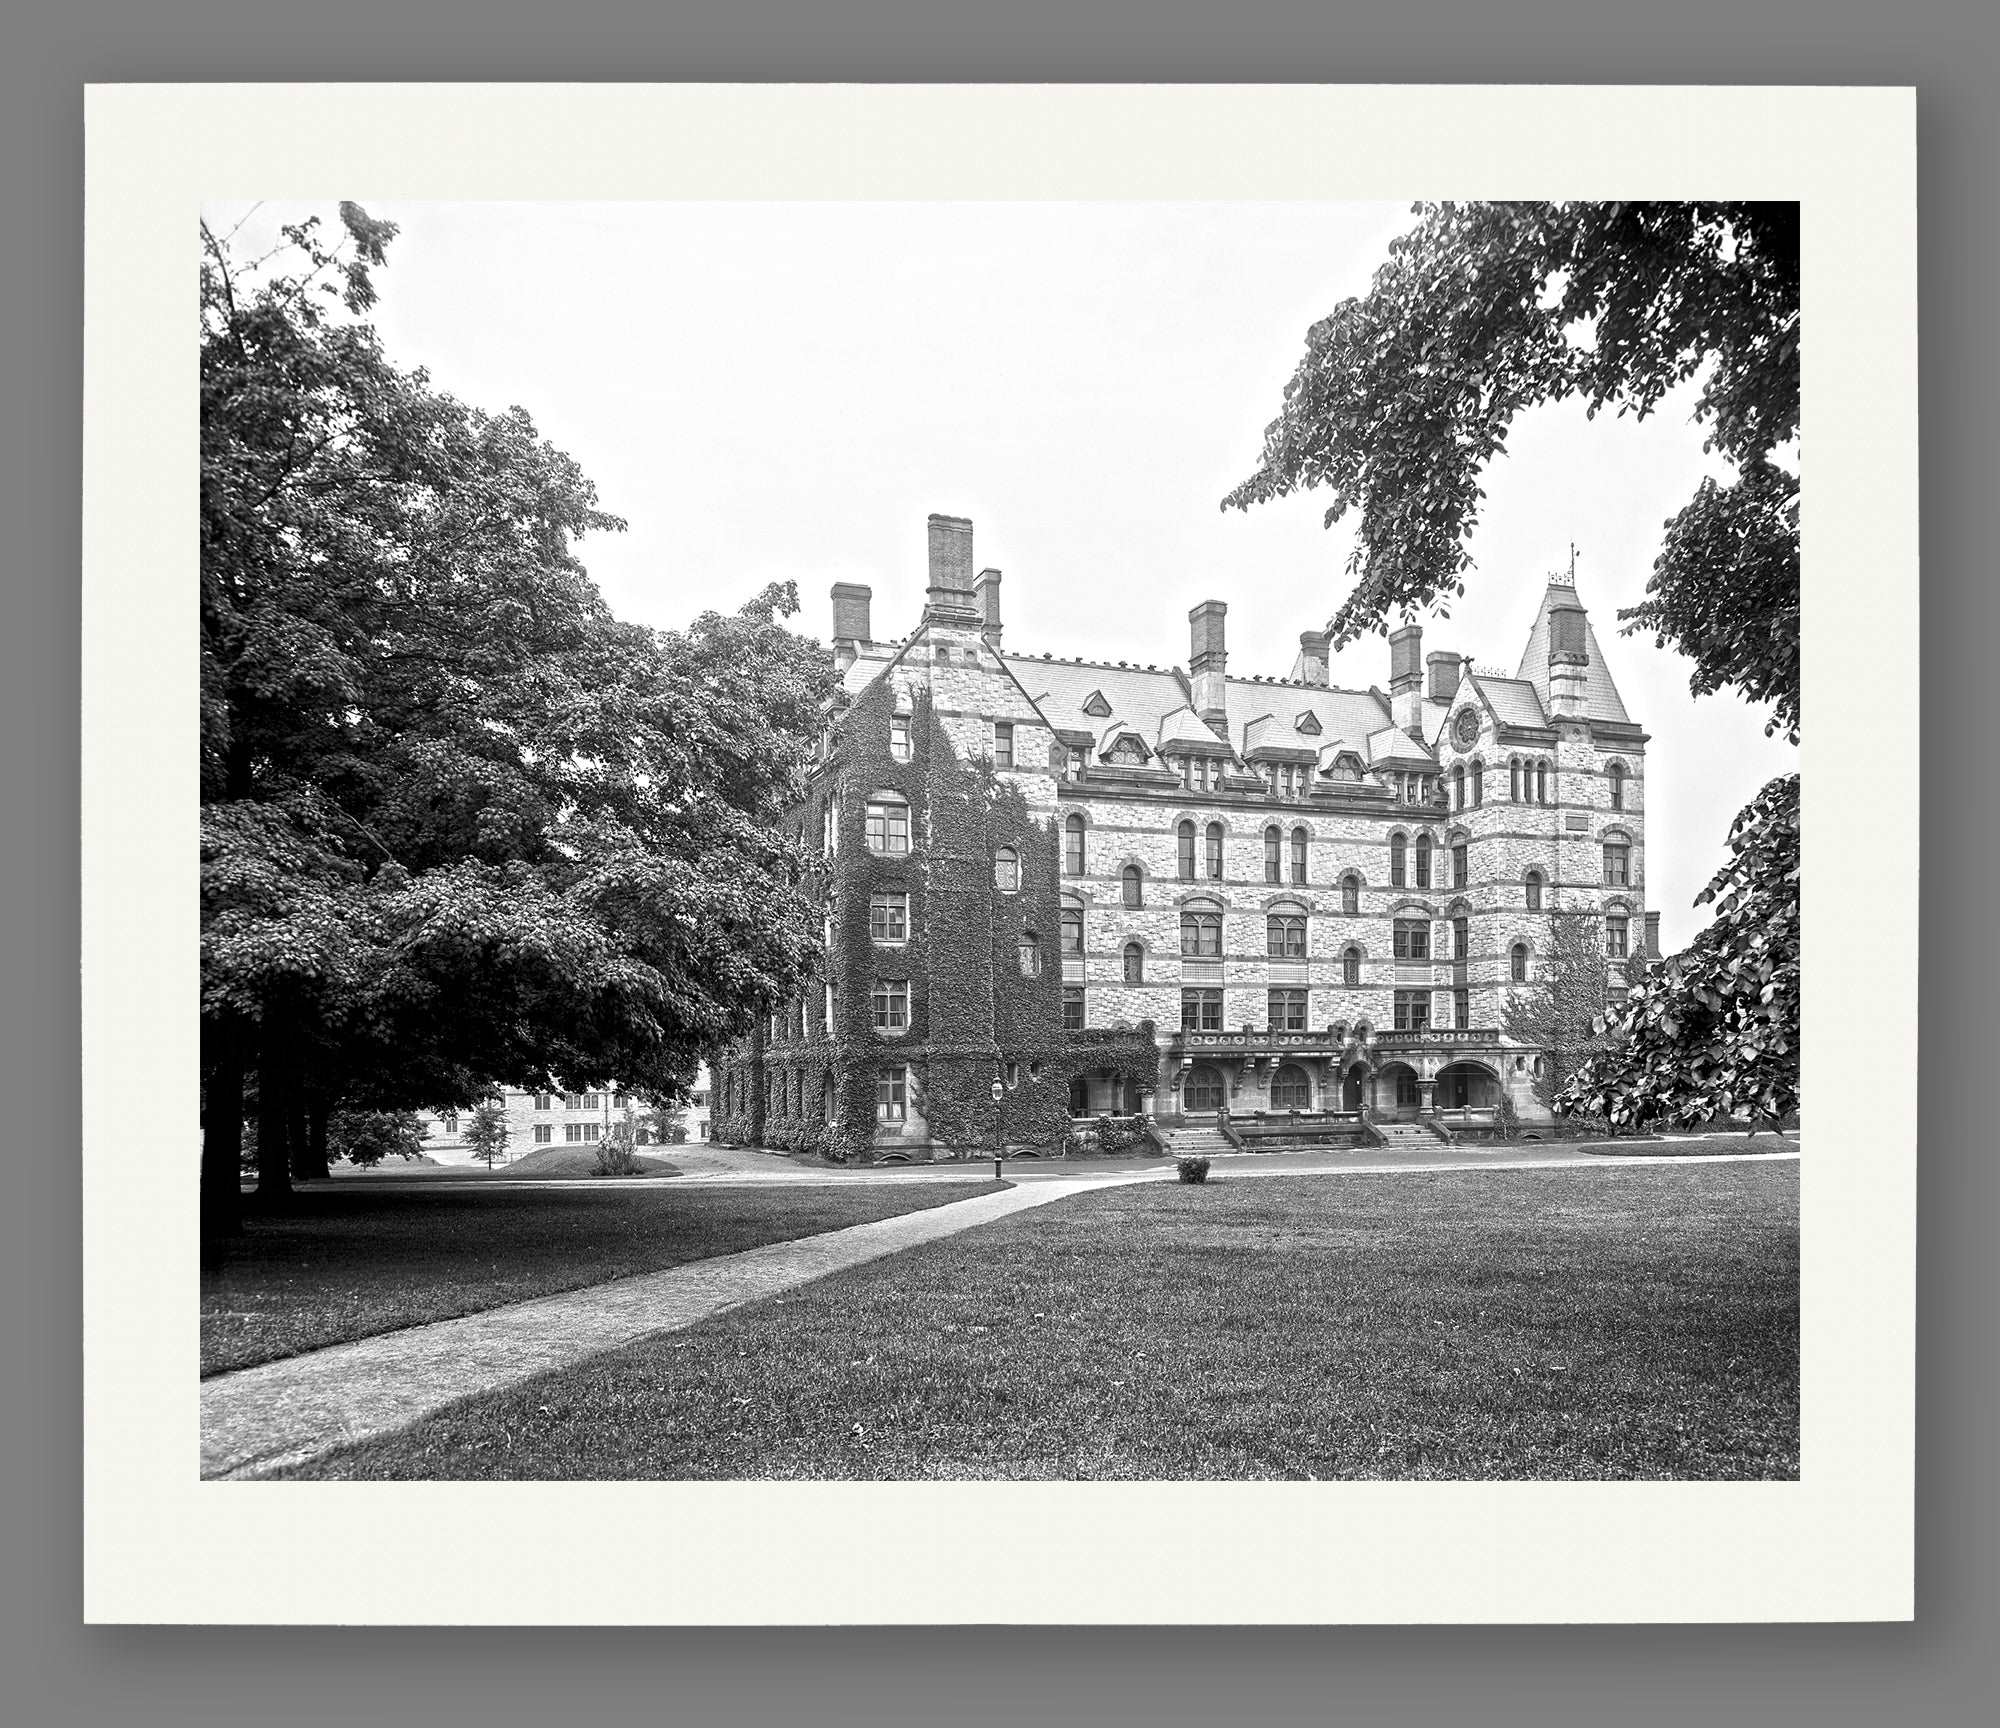 A reproduction print on paper of vintage photograph of Princeton University